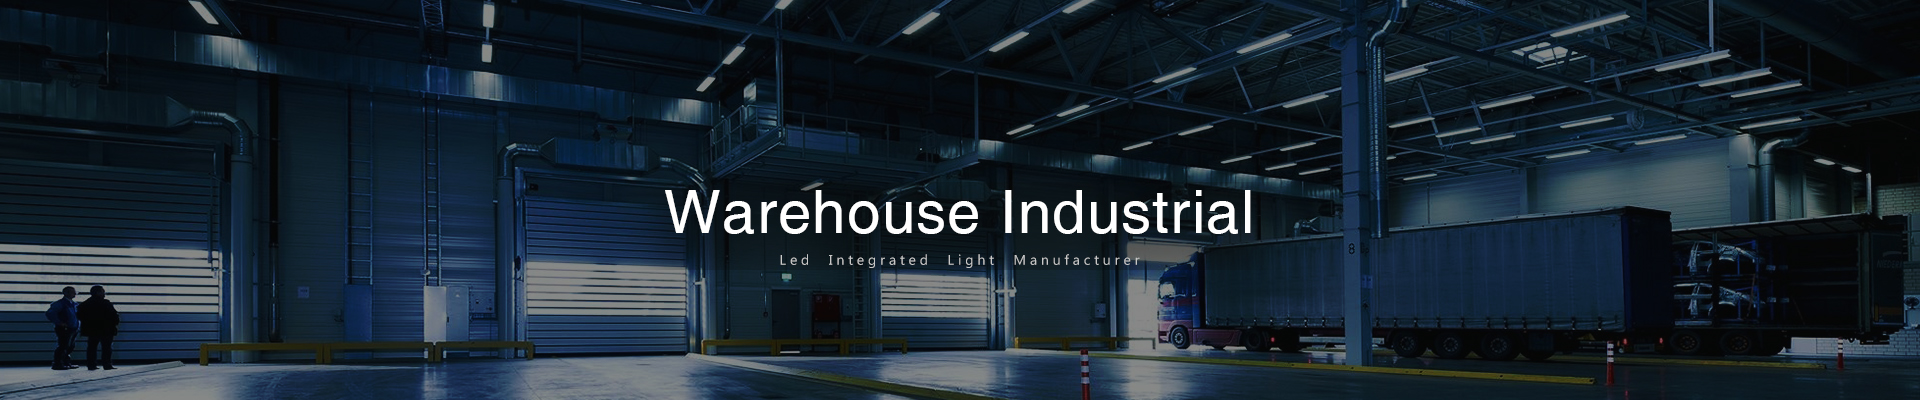 Warehouse Industrial